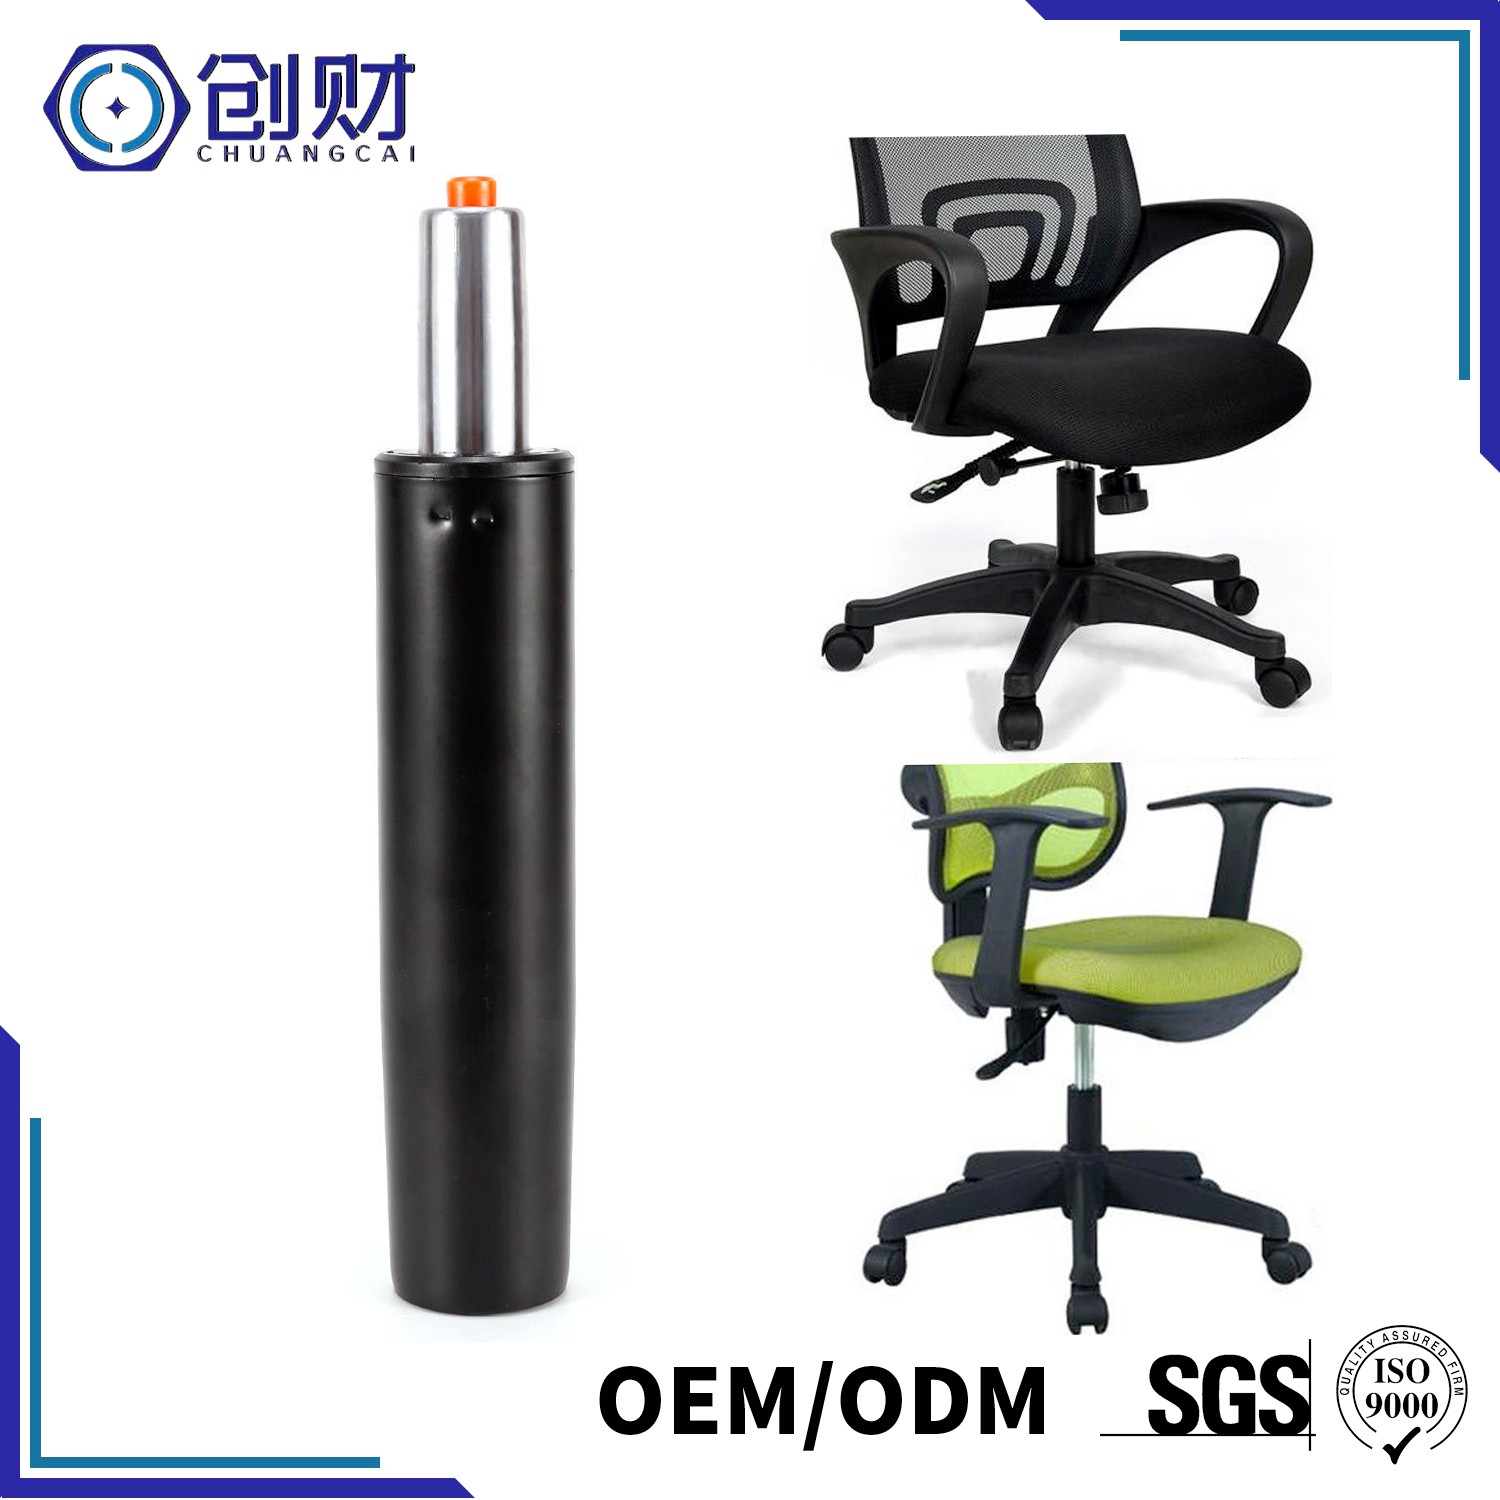 Customized Gas Spring for Office Chair